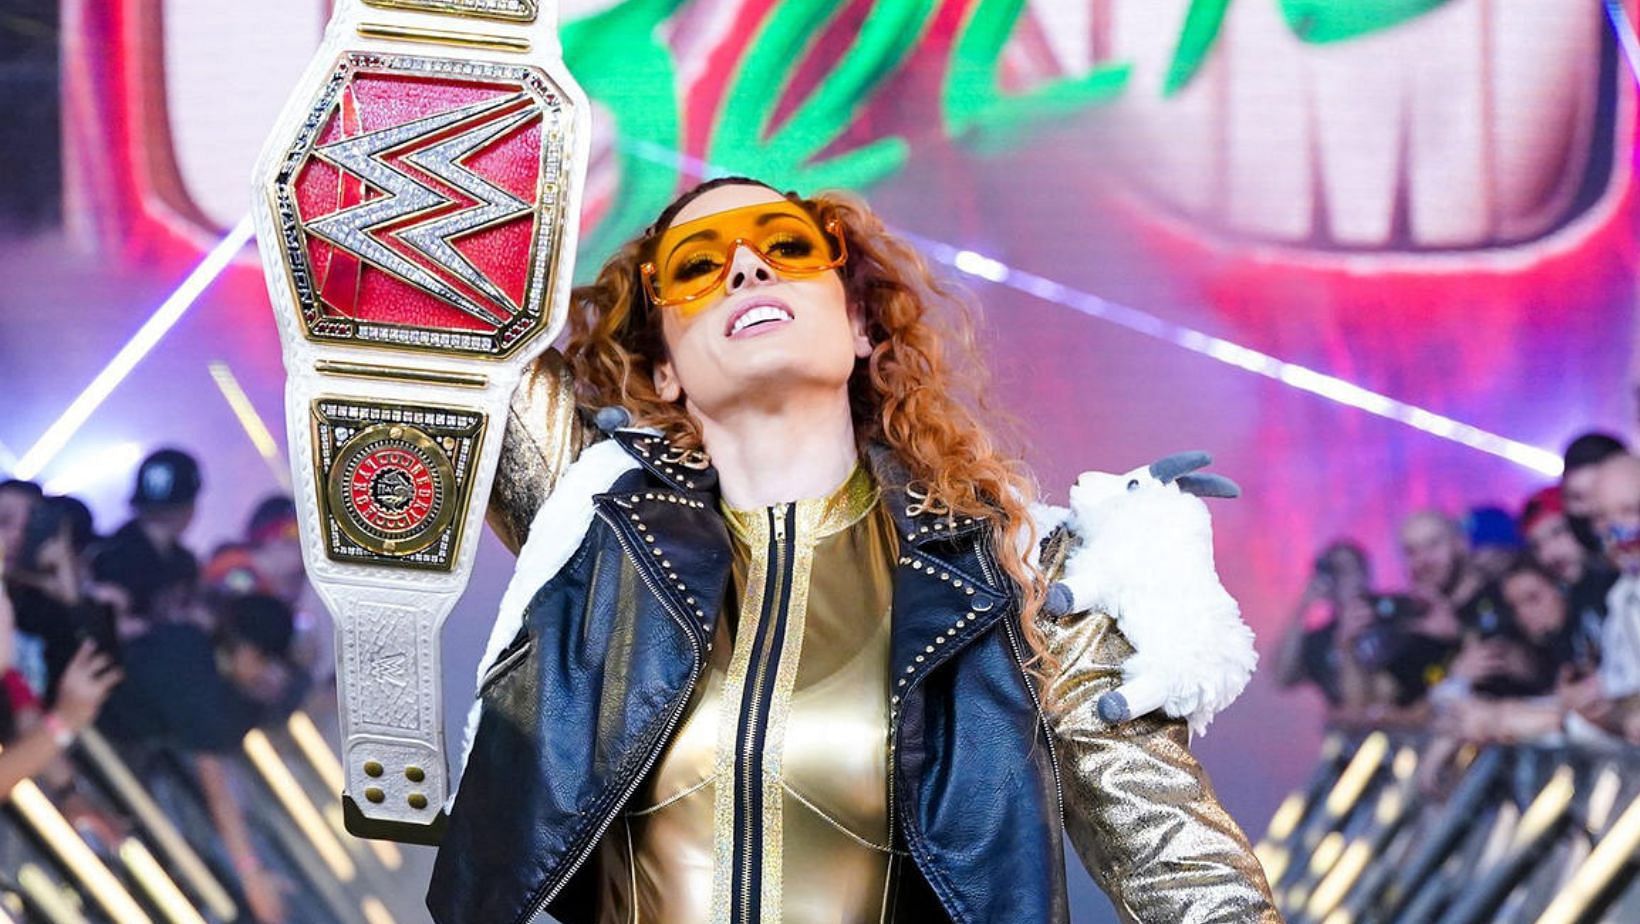 Becky Lynch has been breaking into the acting world